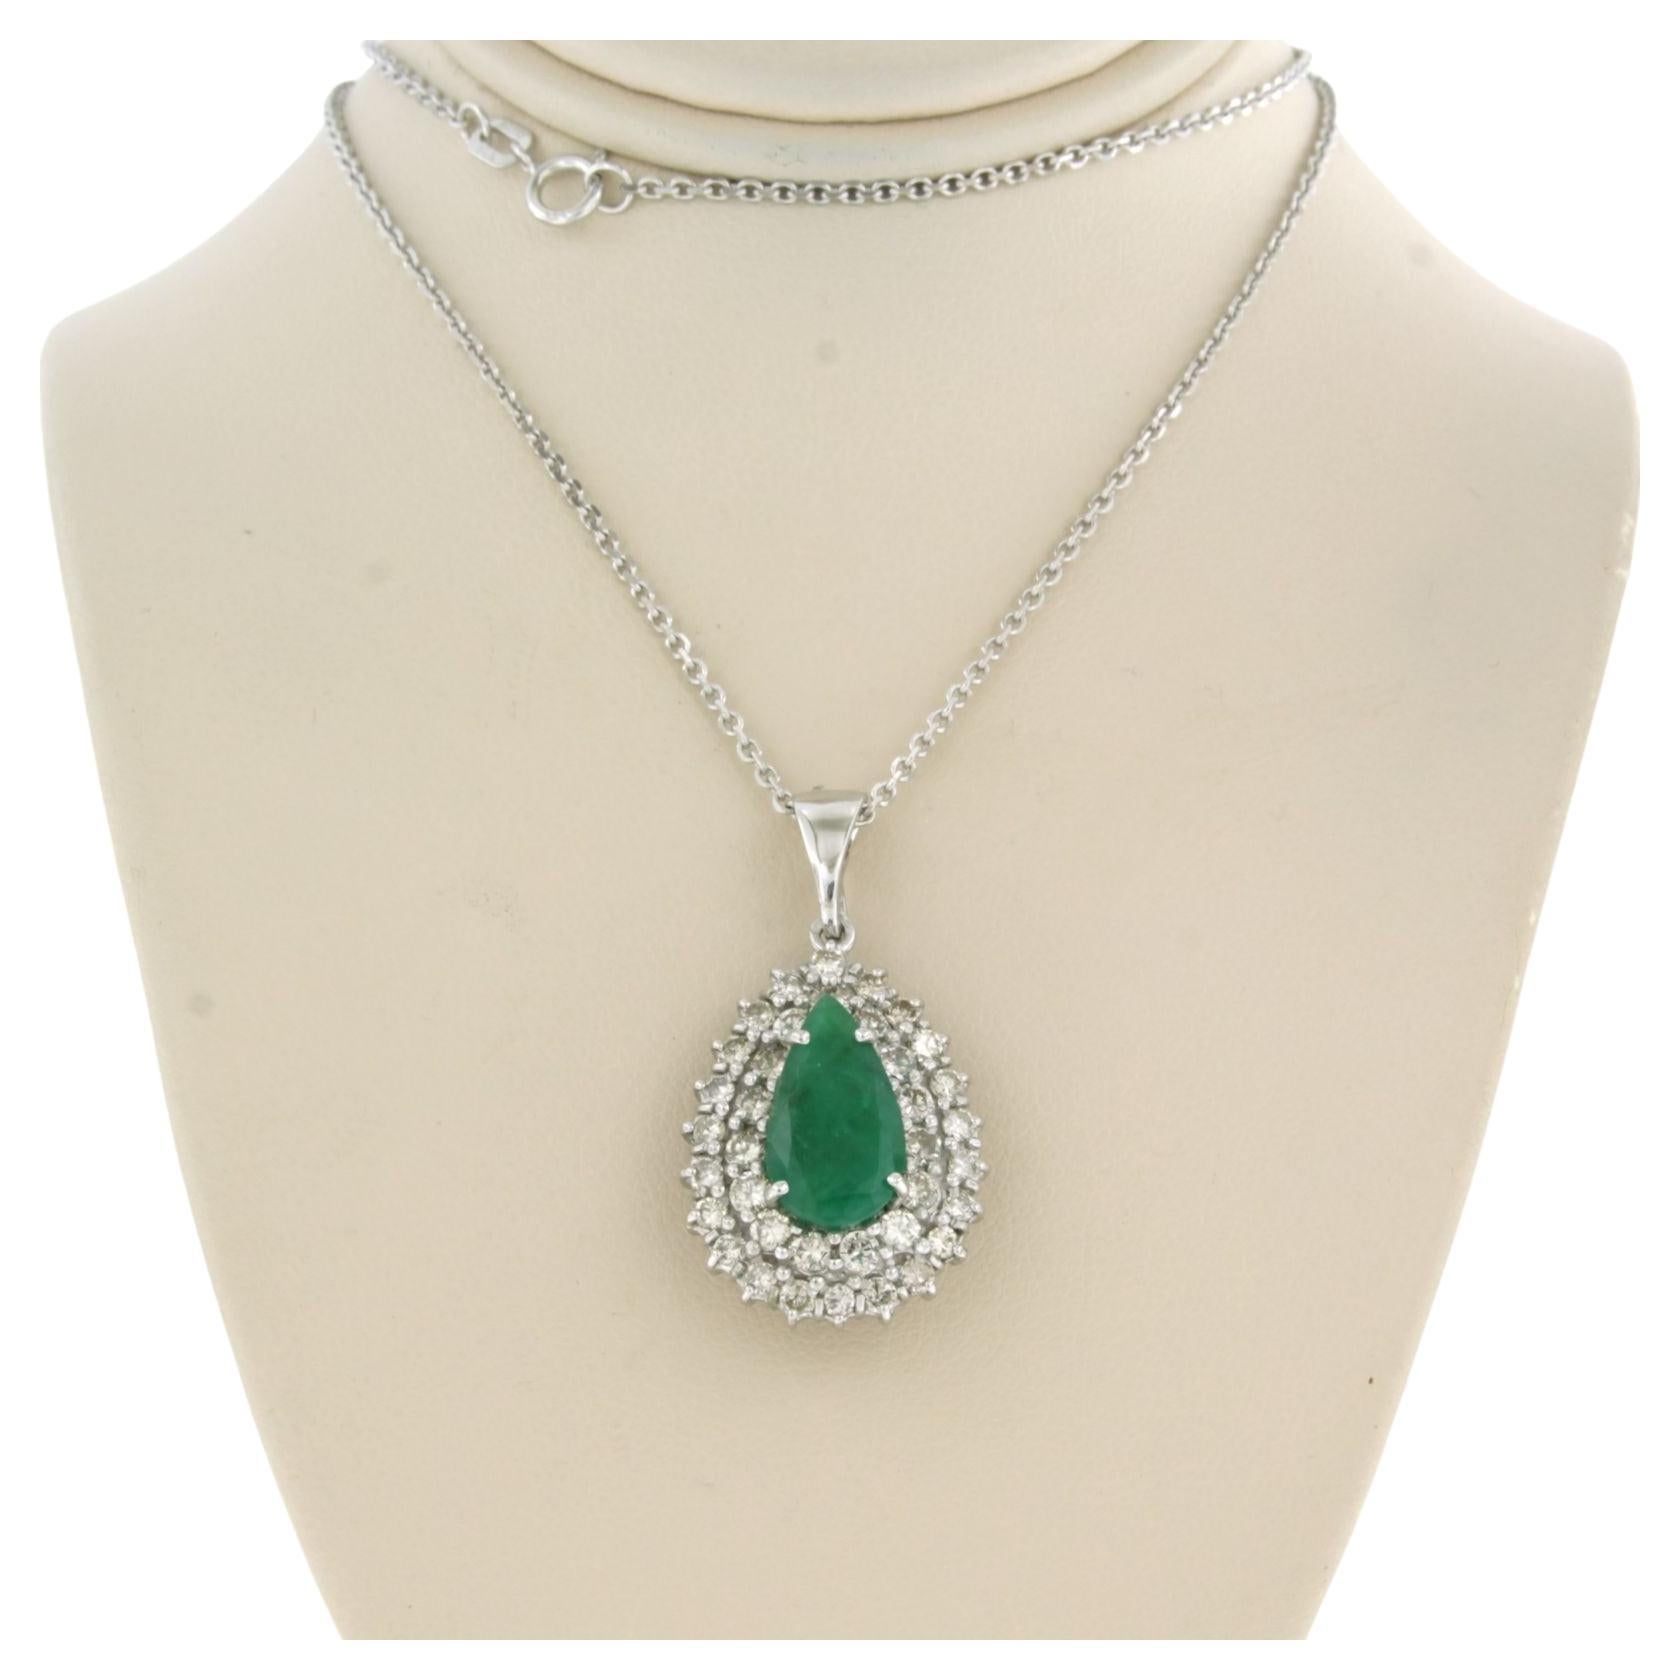 Necklace and pendant set with emerald and diamond 14k white gold